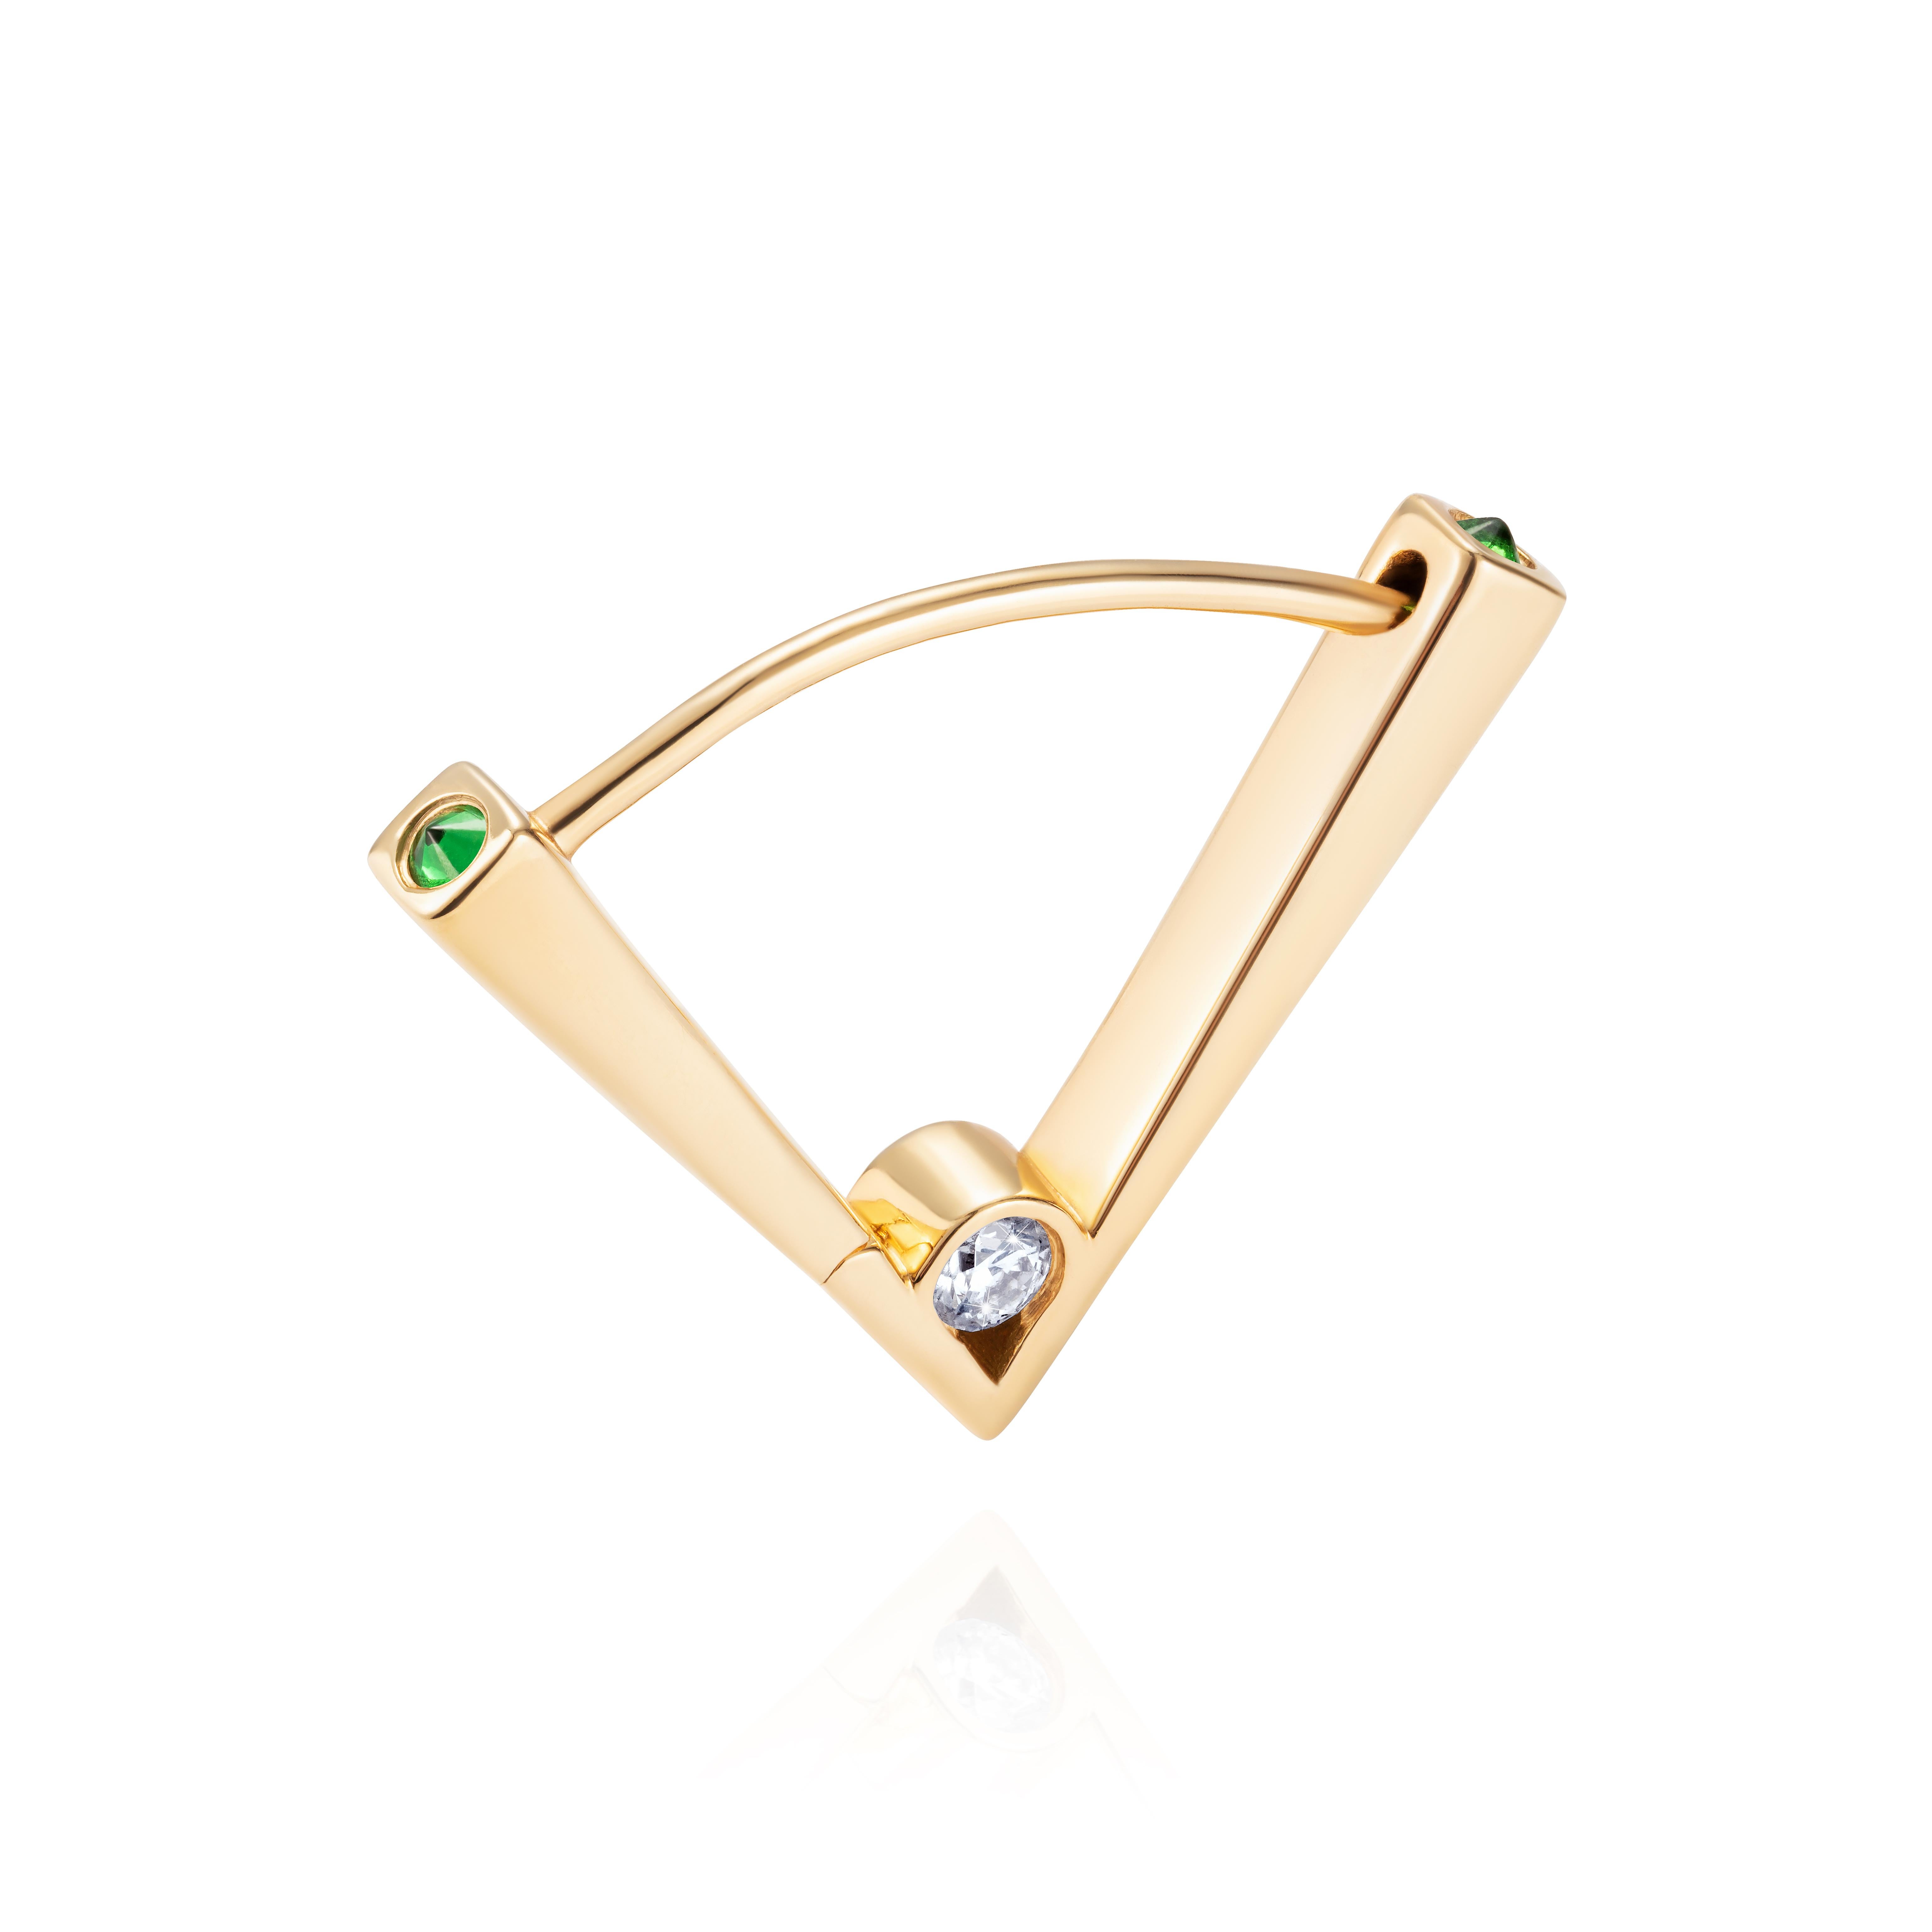 18 Karat Yellow Gold Earring Set With Diamond and Tsavorites

This yellow gold single earring can be mixed and matched with other styles from the Babylon collection. We recommend pairing it with a drop earring. 

The design of this extraordinary